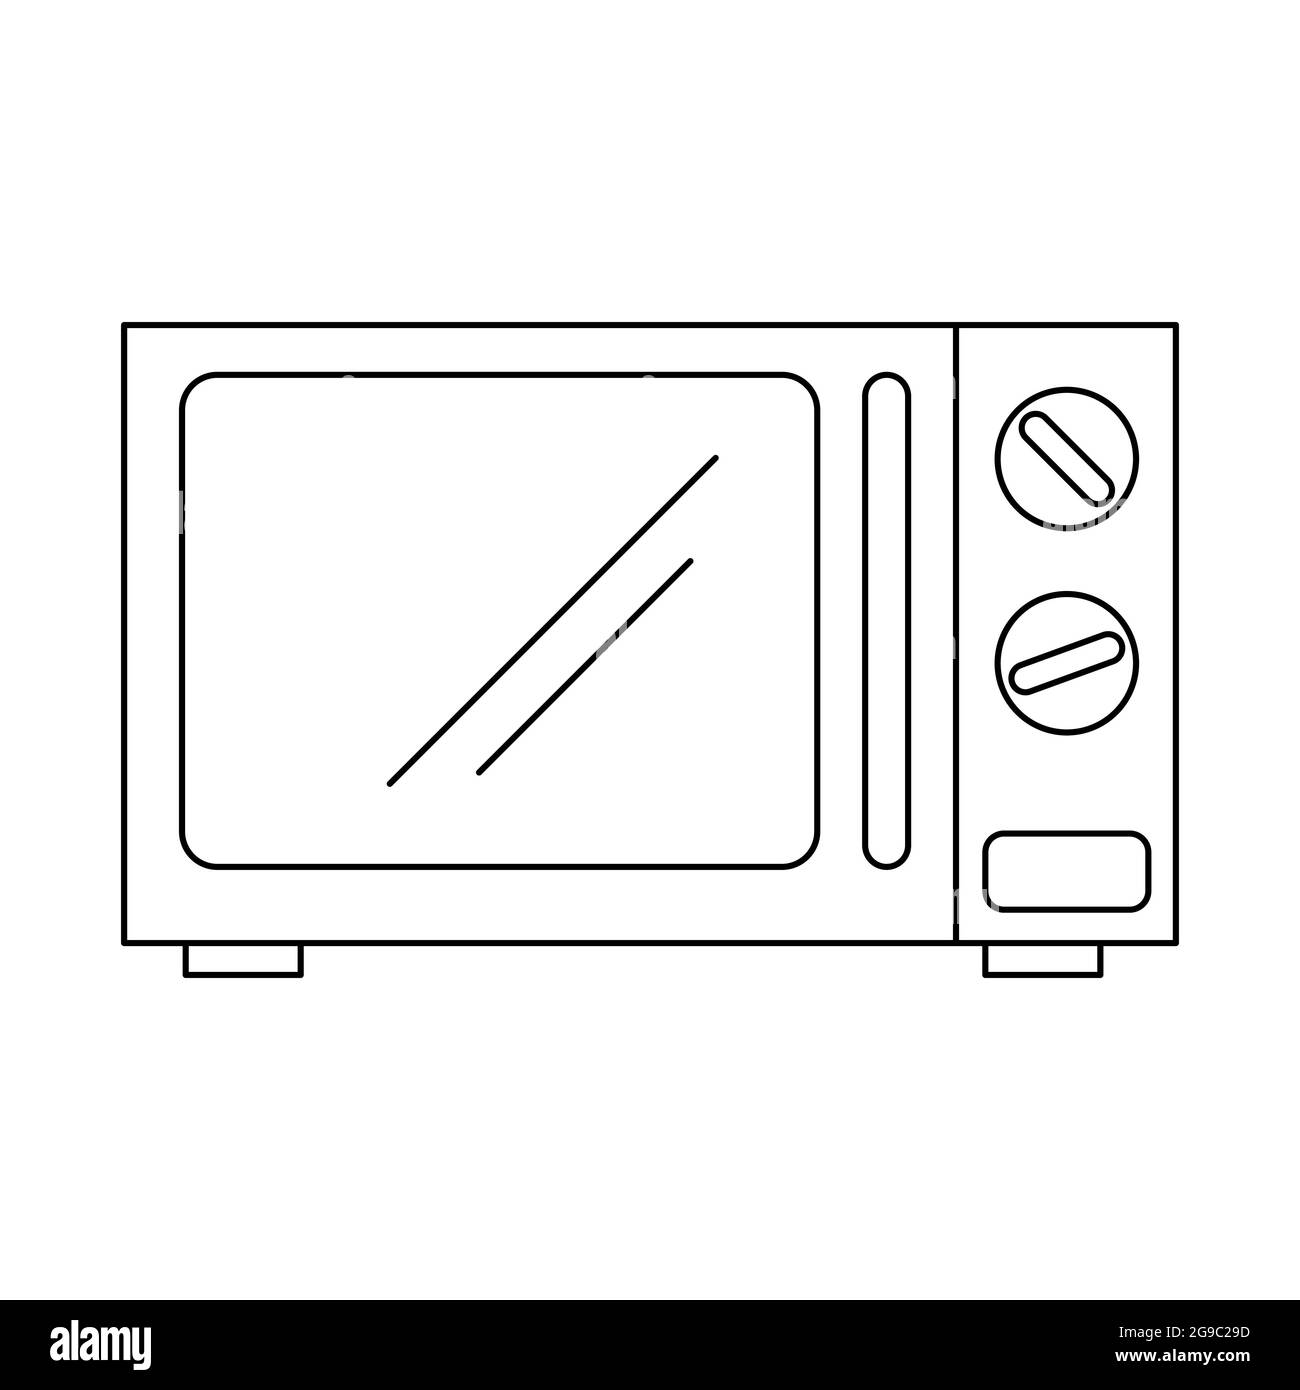 Microwave outline icon. Vector illustration isolated on white background. Small appliance for kitchen and home. Household tool symbol for web design. Stock Vector